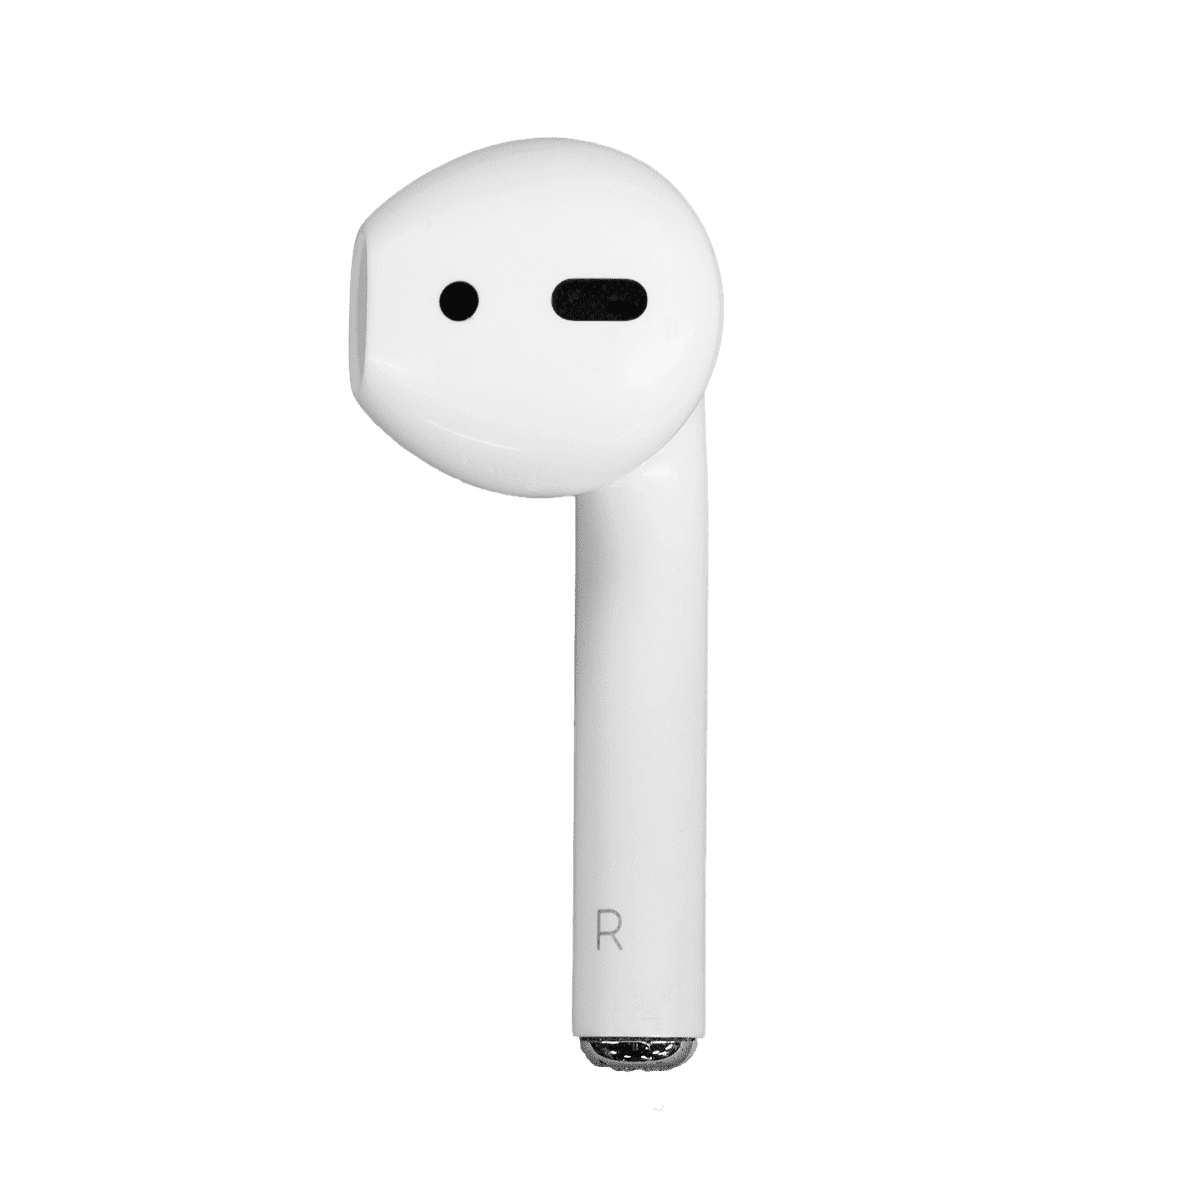 Can you buy a single AirPod